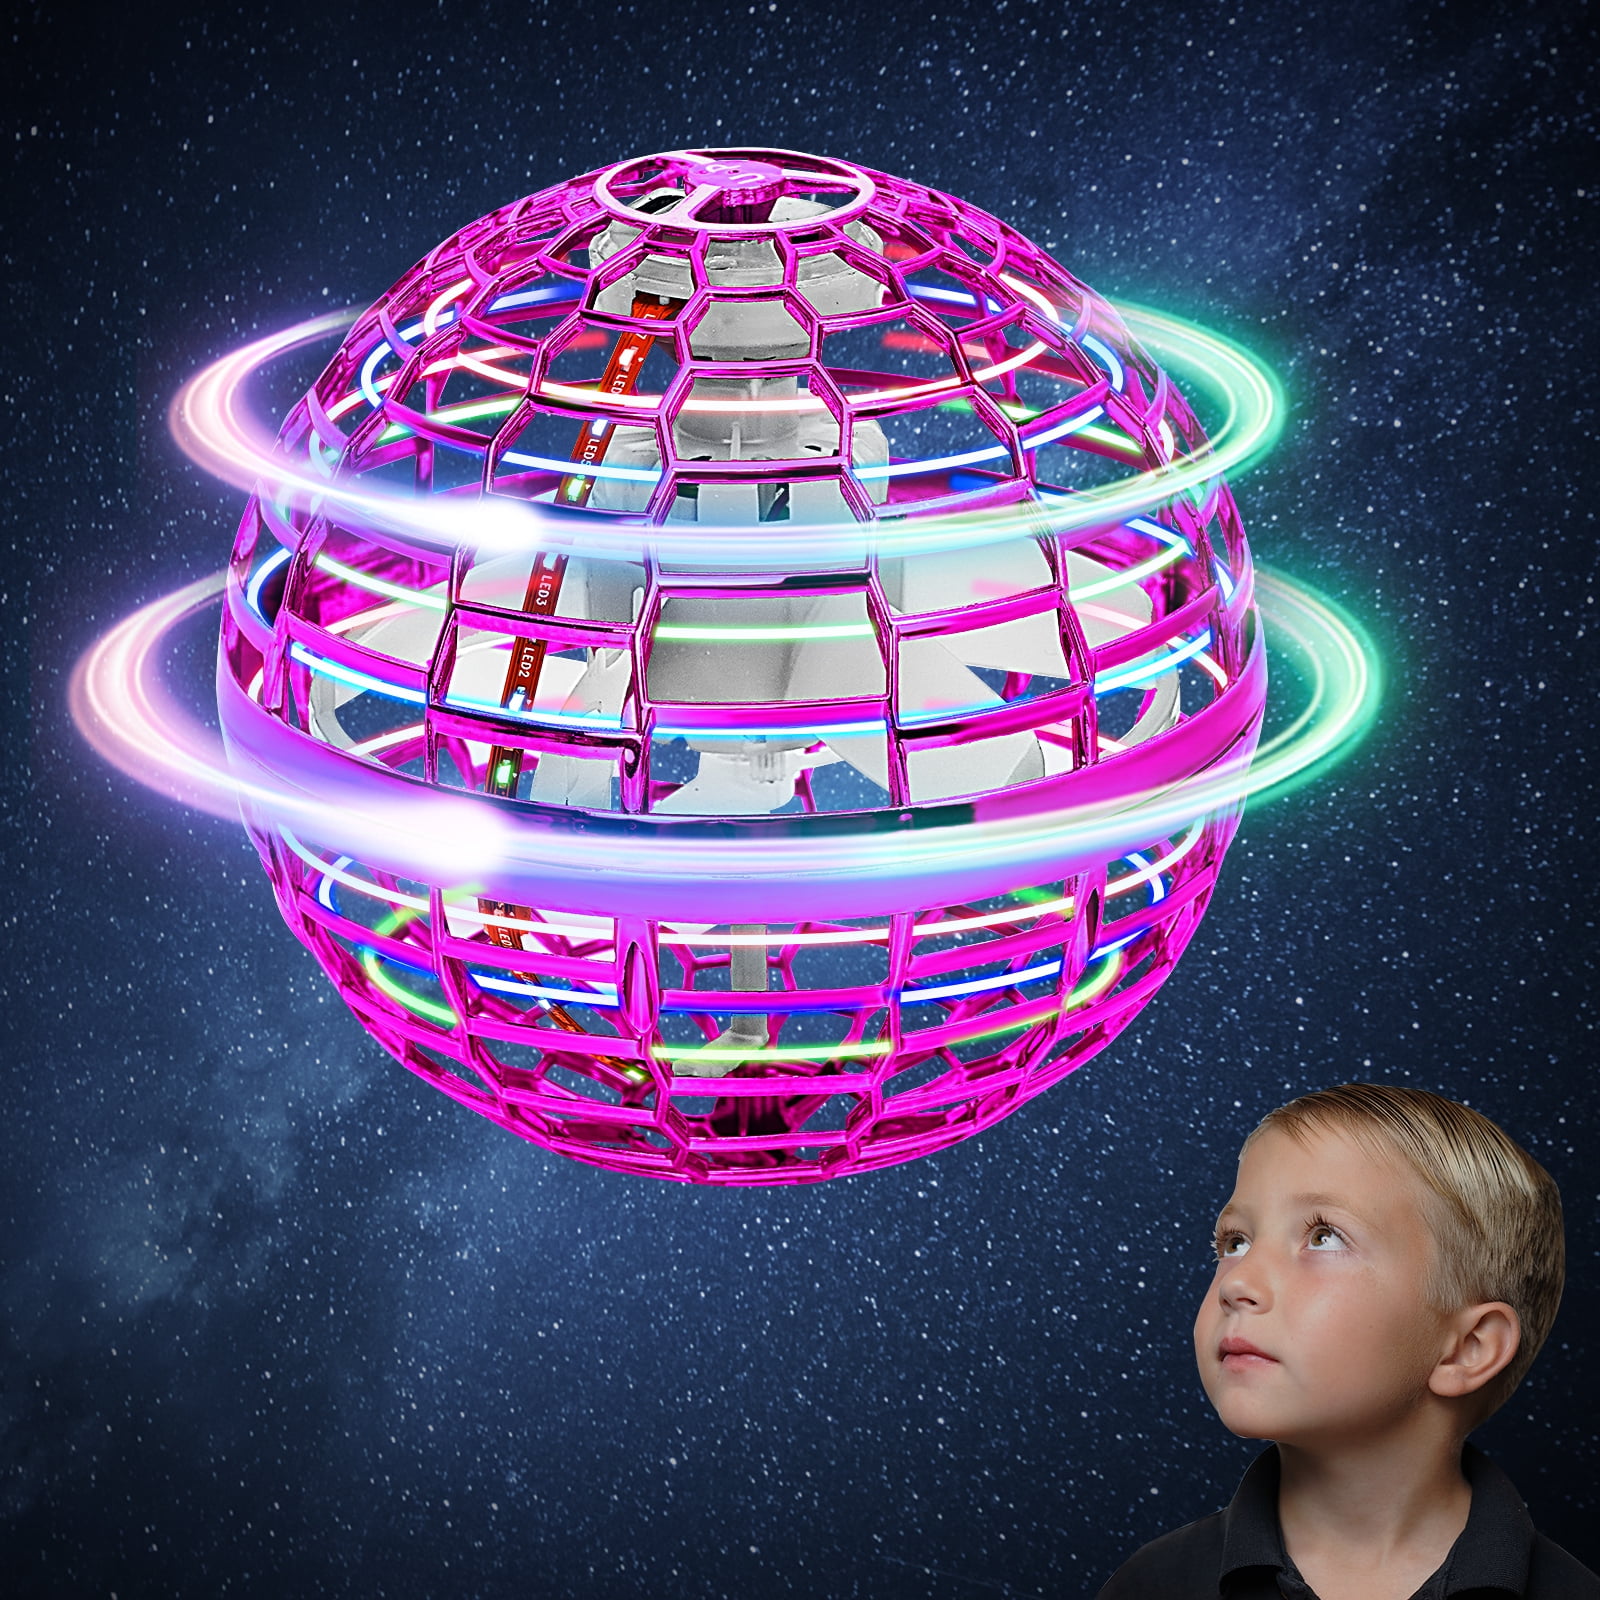 Wonder Sphere Magic Hover Ball- Purple Color- Skill Level Easy- STEM  Certified, Novelty and Gag Toys, Indoor and Outdoor Play 